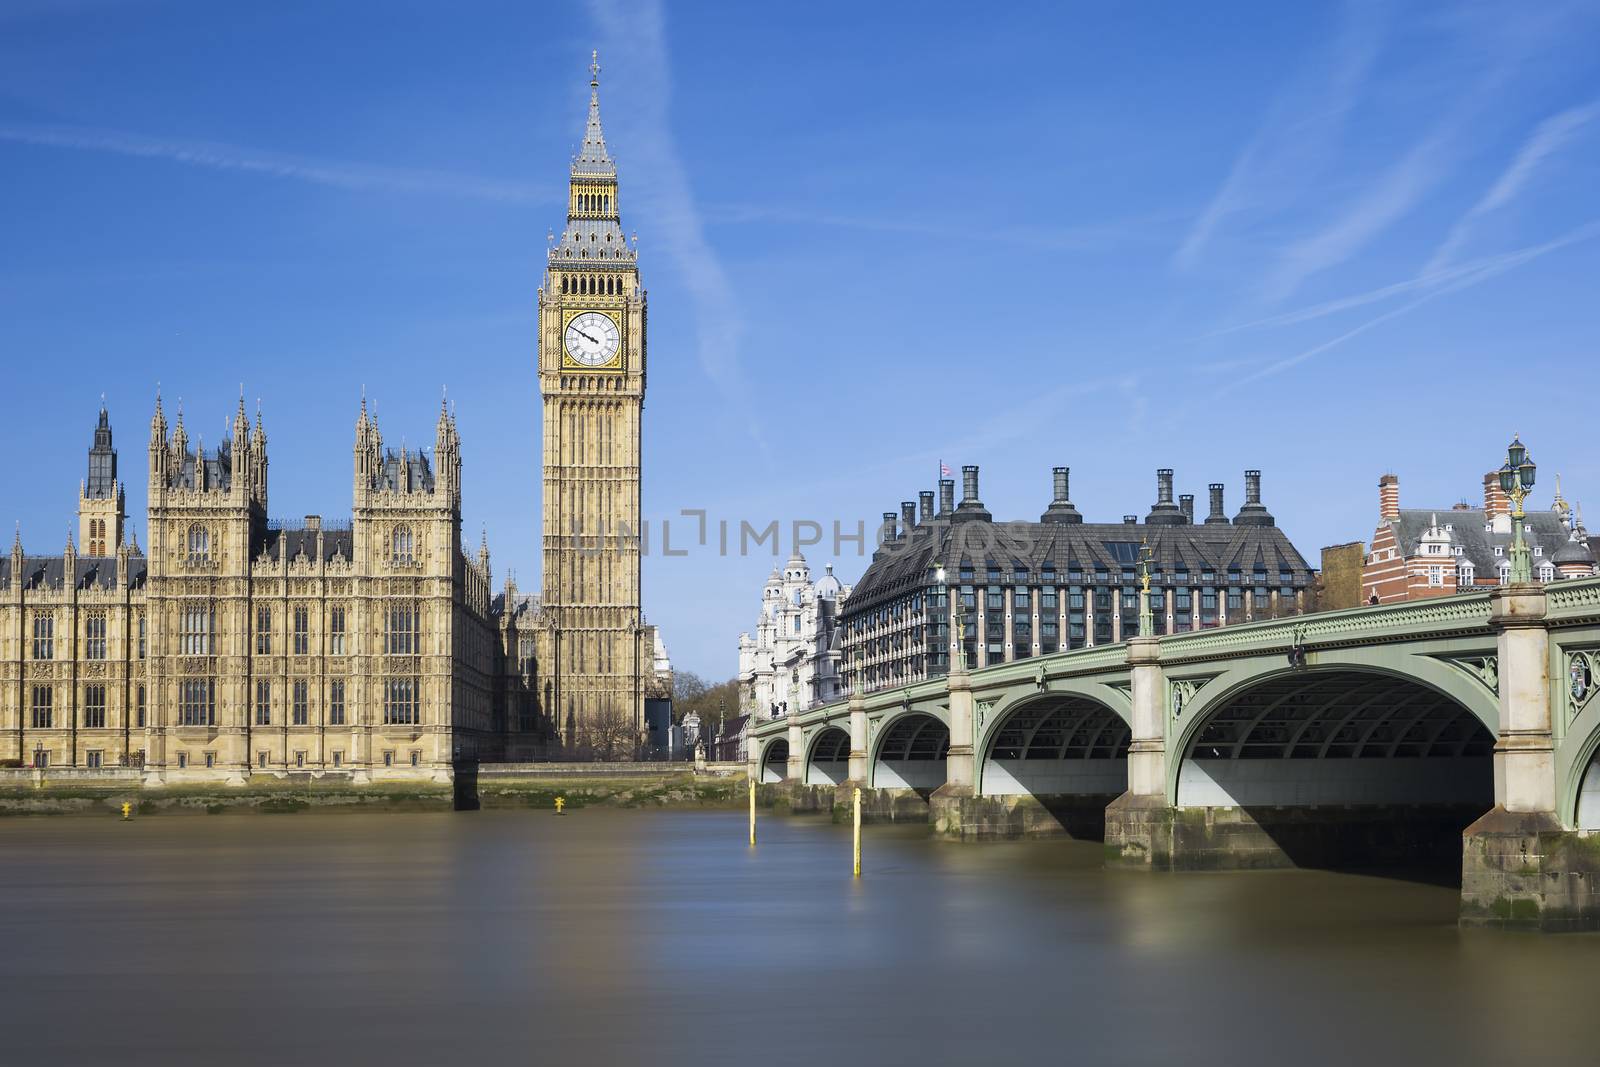 View of Big Ben and Houses of Parliament, London, UK